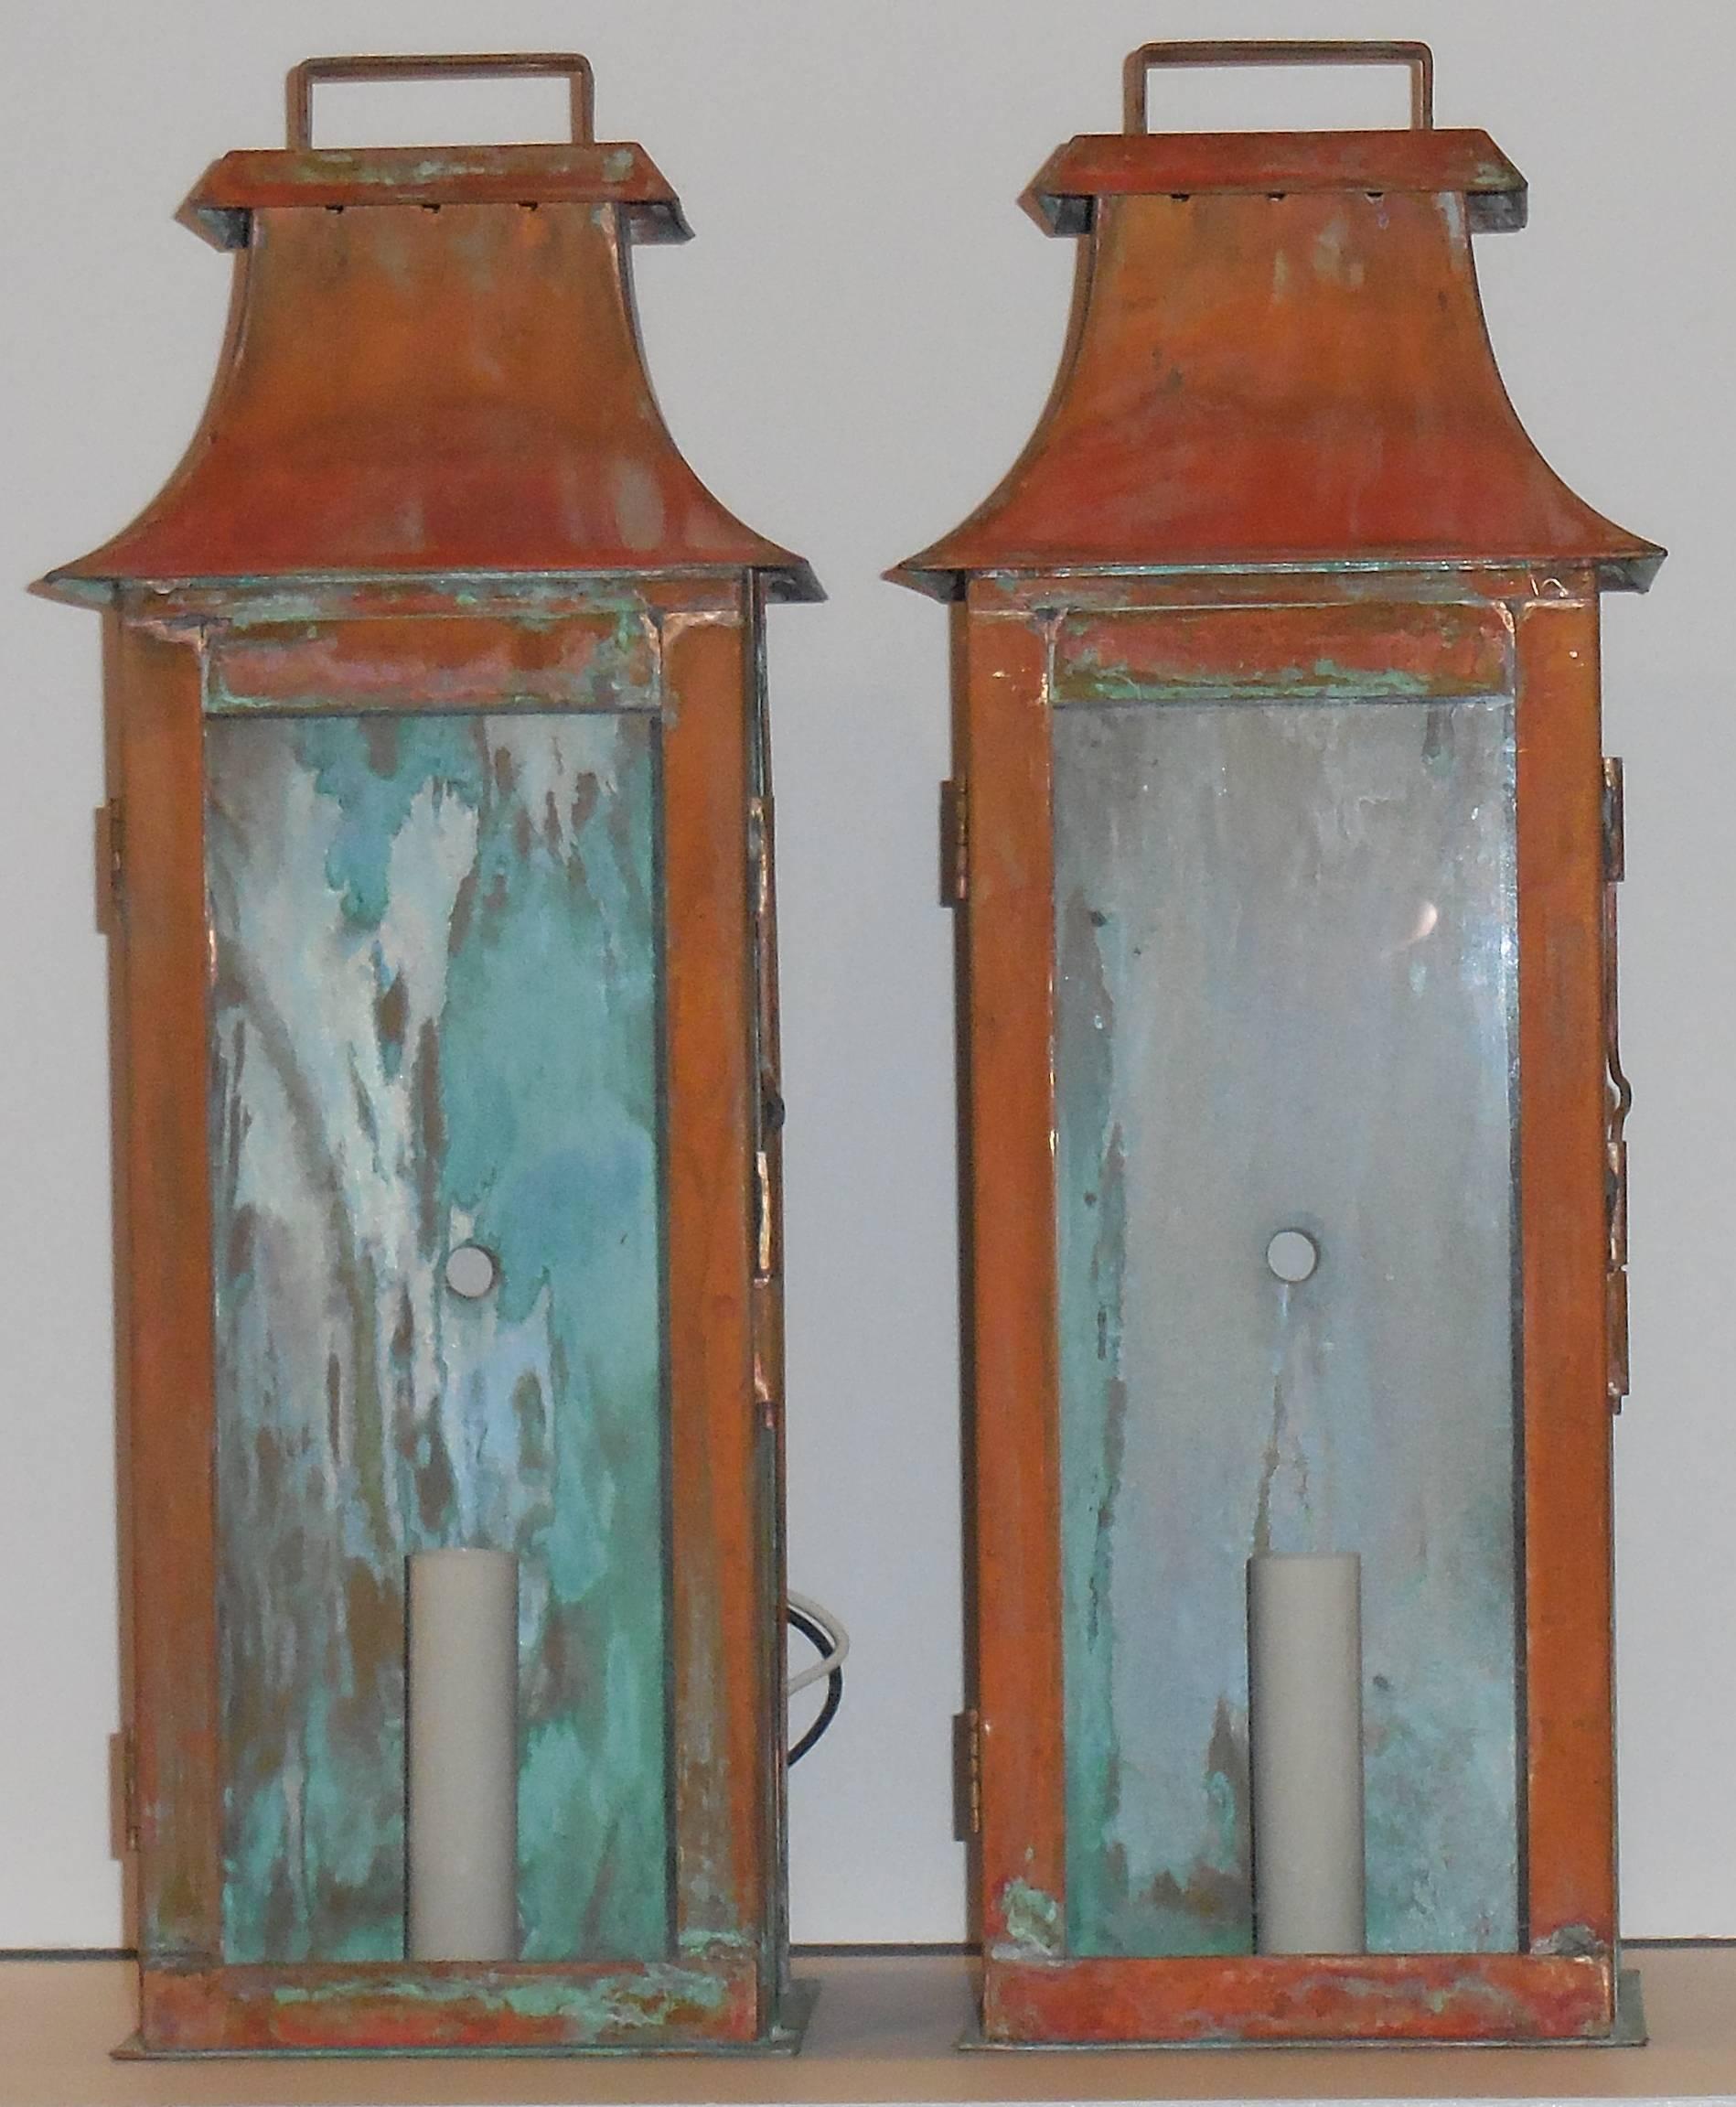 Beautiful pair of wall lanterns made of copper with one 60/watt light.
Great patina electrified and ready to light.
Made in the USA up to code UL approved.